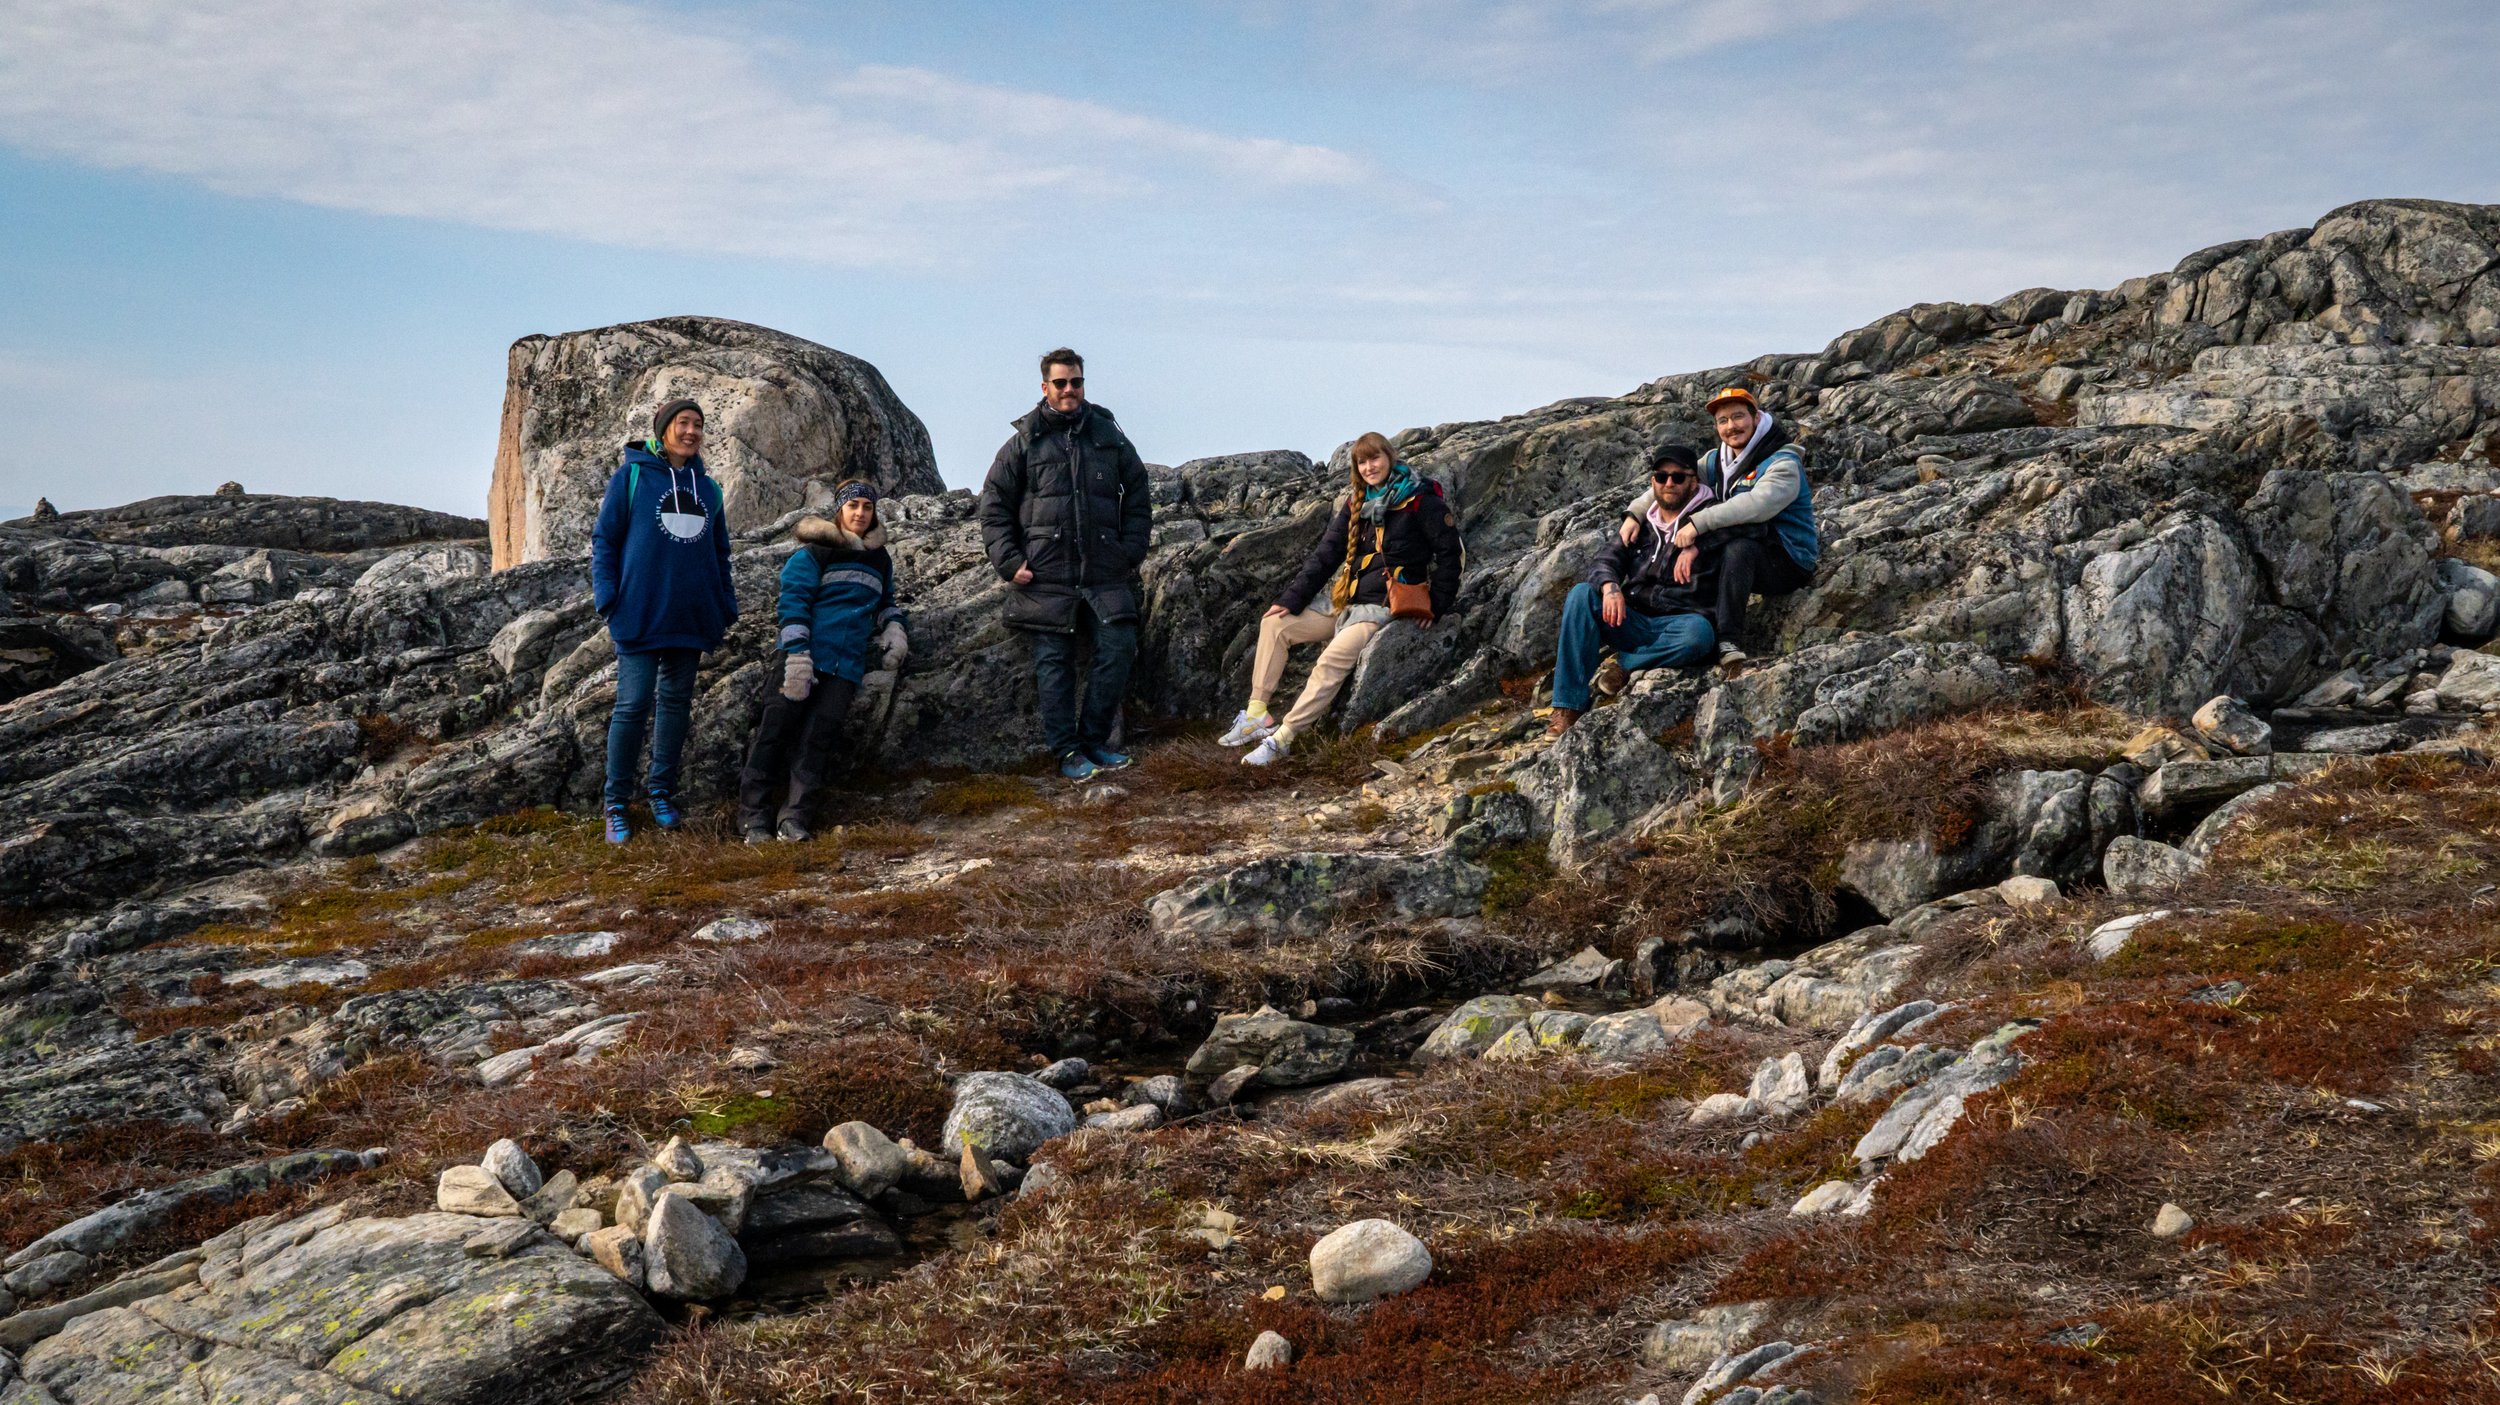   Iniut Futures  ilinniaqtuit and alumni, Bronson Jacque, Jason Sikoak, Jessica Winters and Yvonne Moorhouse, pictured with the director of Nuuk Nordic Festival, Jonas Nilsson and mural artist Cheeky. Nuuk, Greenland. May 2023. Photograph by Bronson 